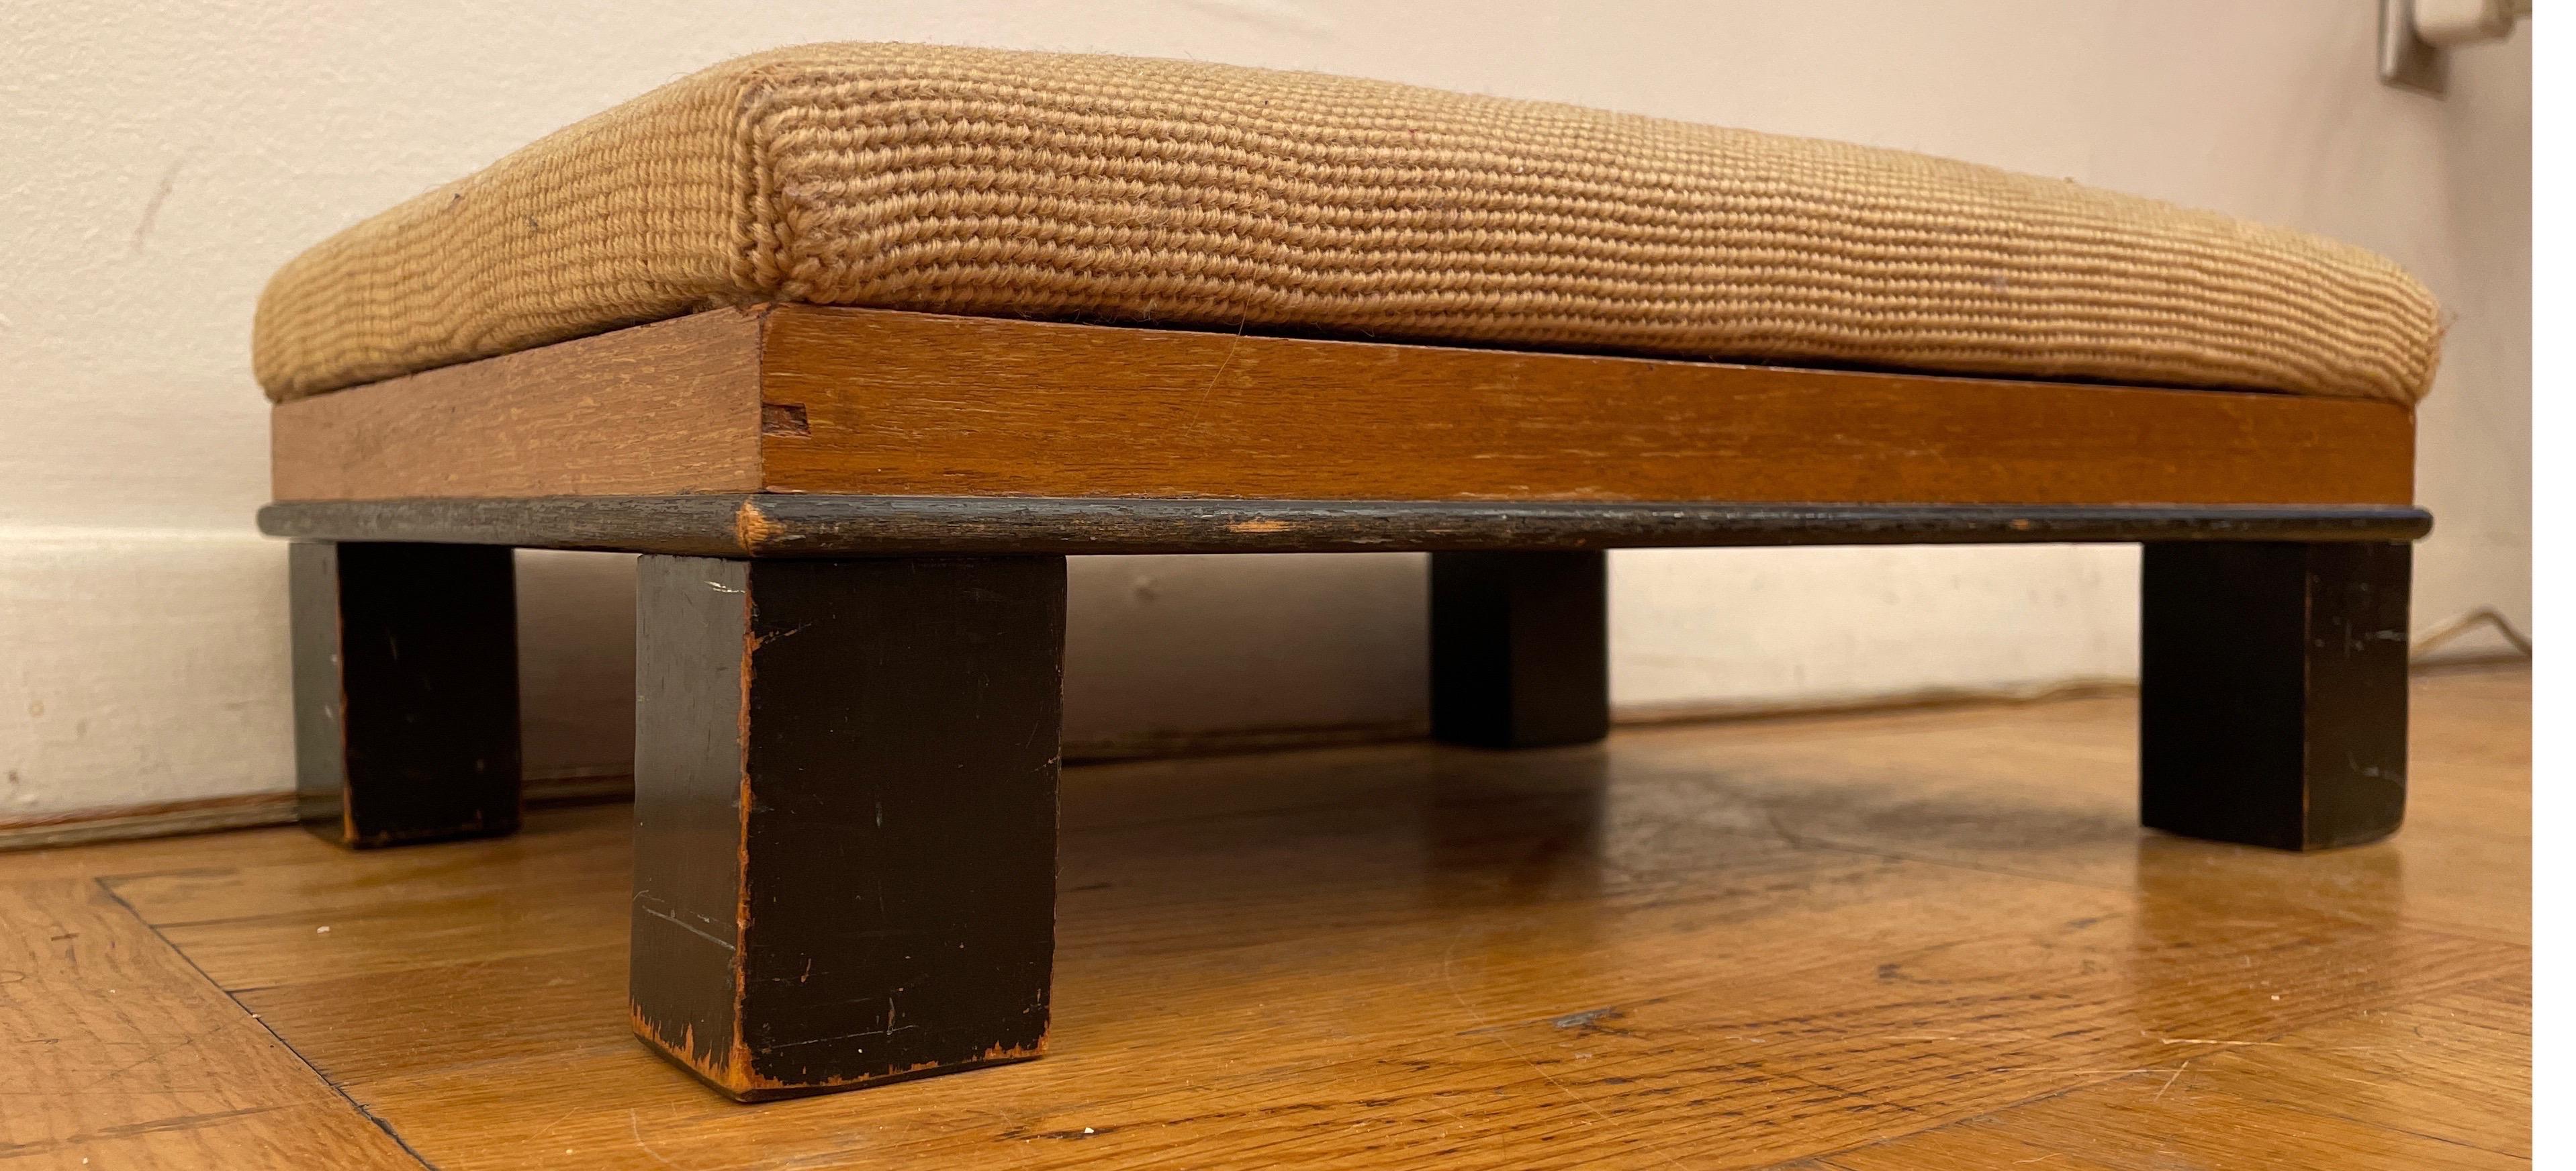 This beautiful footstool is in great condition with the original hand embrodiery still in excellent shape. Footstools have evolved throughout history starting in ancient Egypt, where it was utilized to ascend chairs perched high off the ground. It